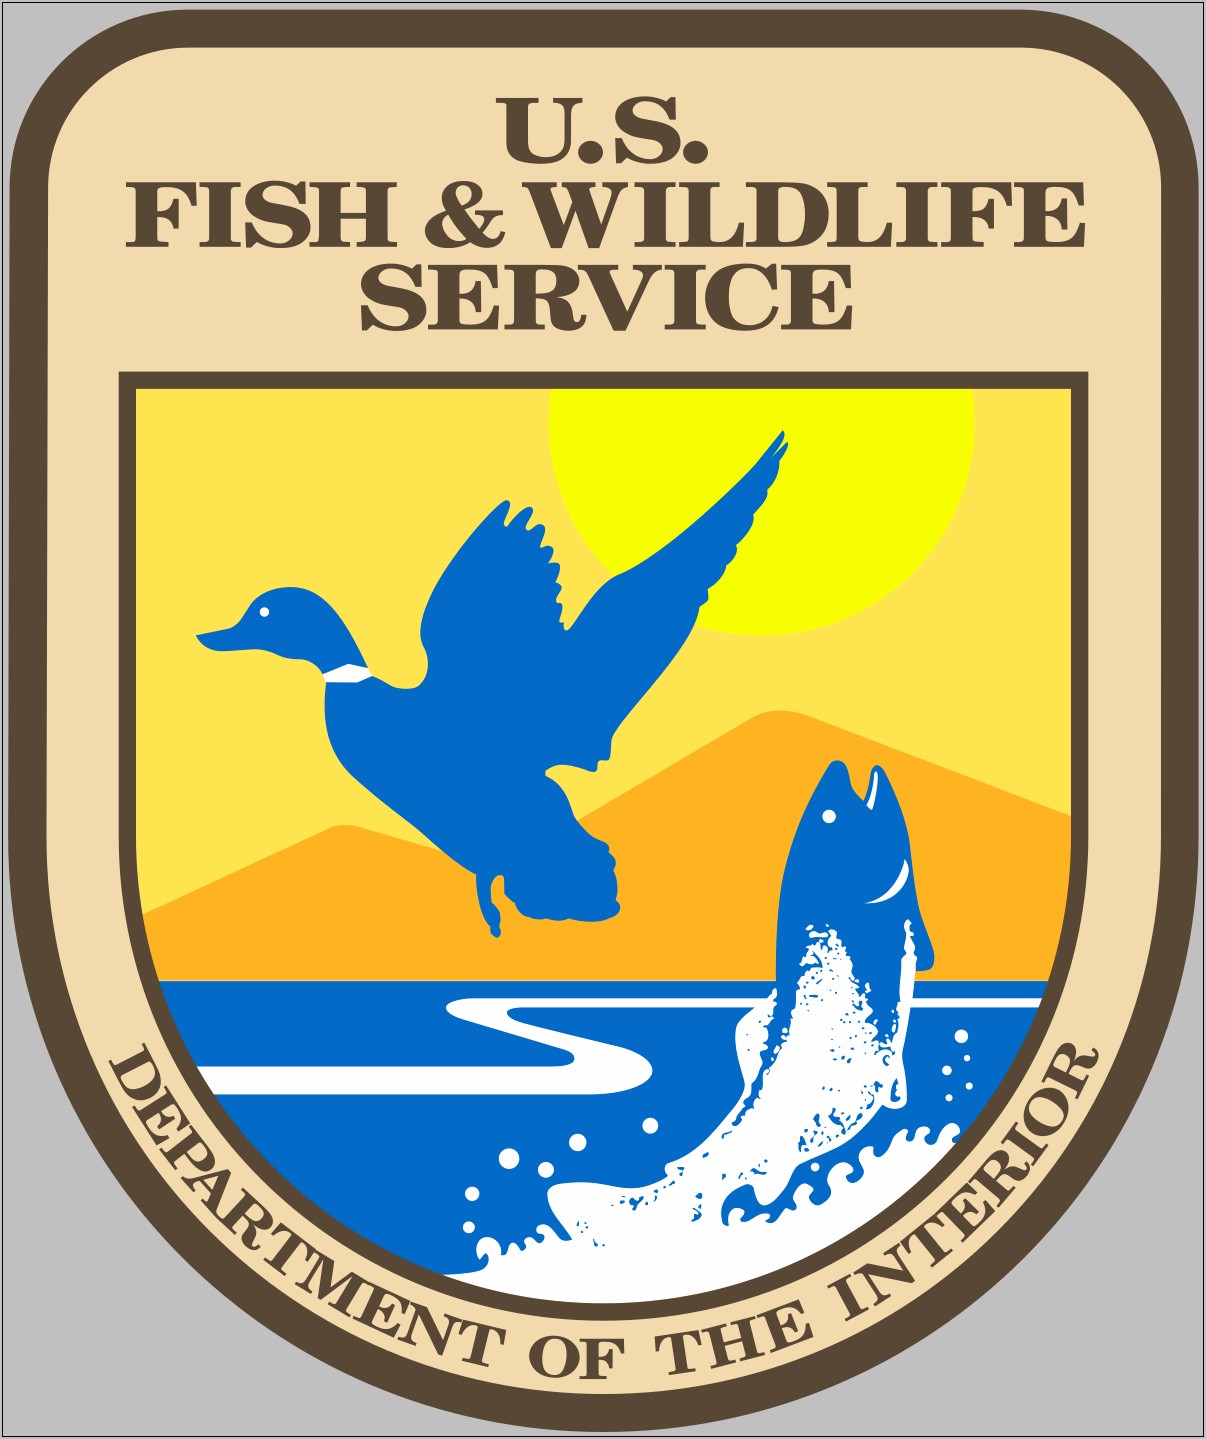 Example Usajobs Resume For Fish And Wildlife Service